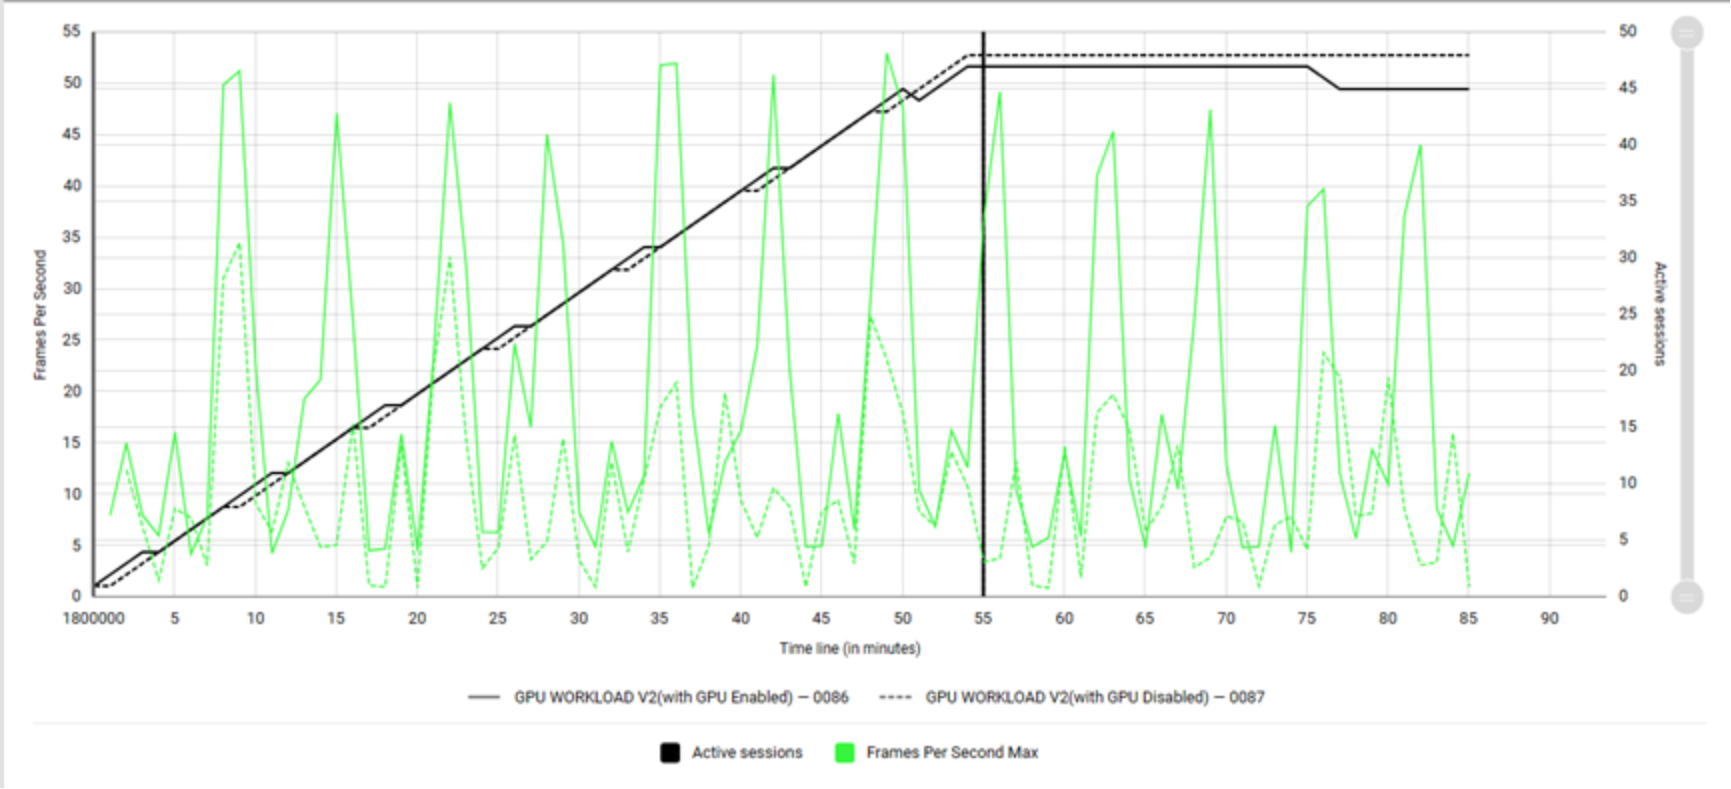 This graph shows Mixed workload showing FPS 